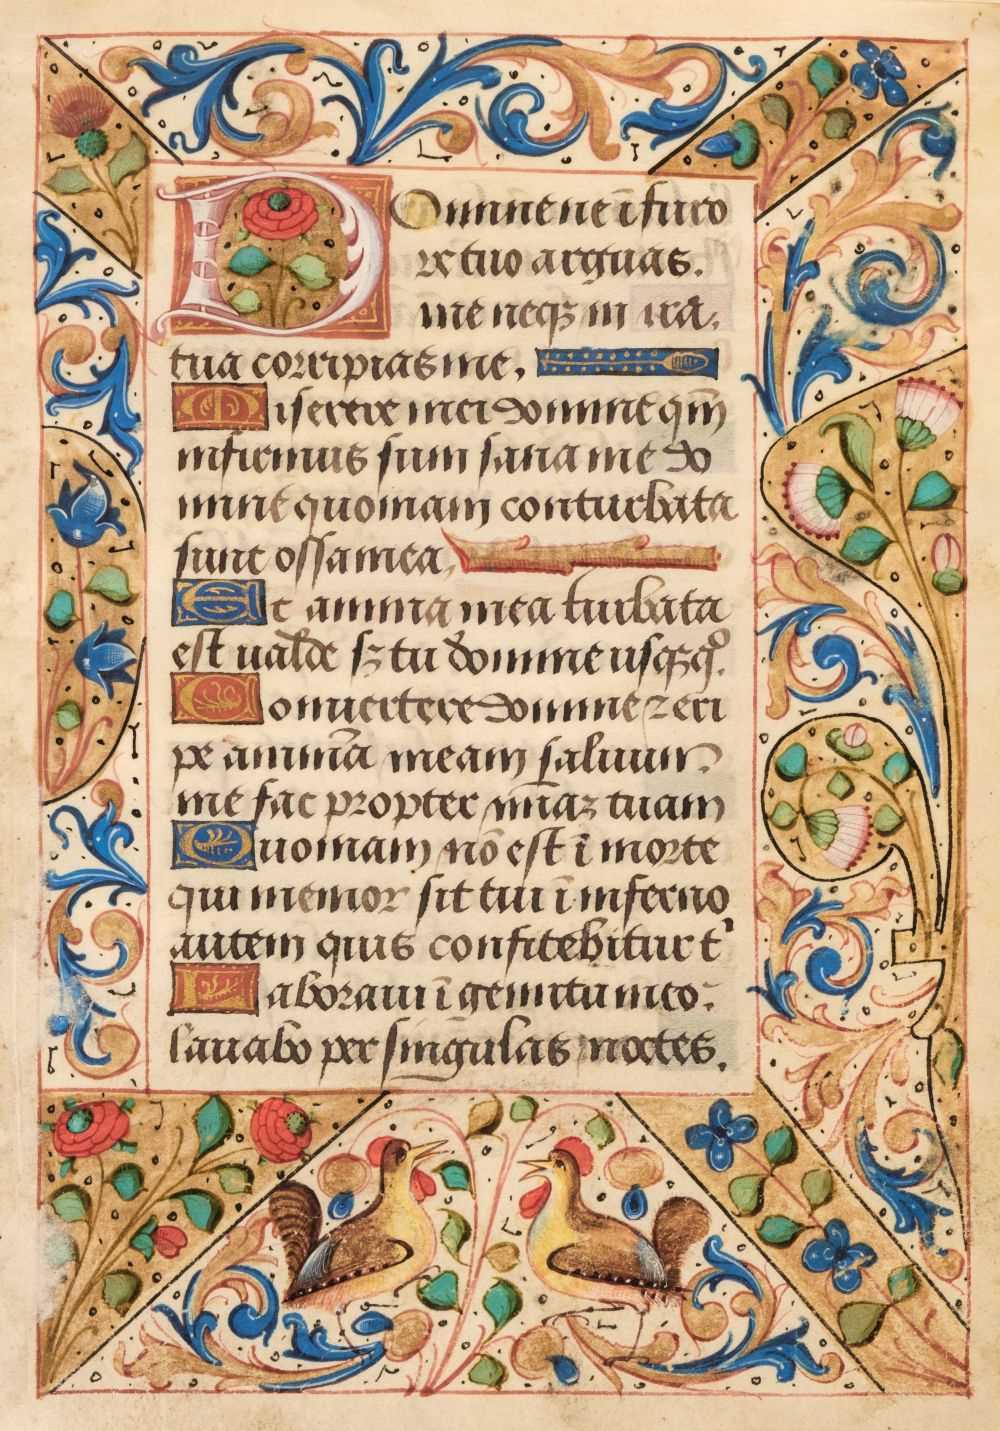 Lot 90 - Illuminated Leaf. Illuminated leaf from a Book of Hours, Northern France, circa 1500